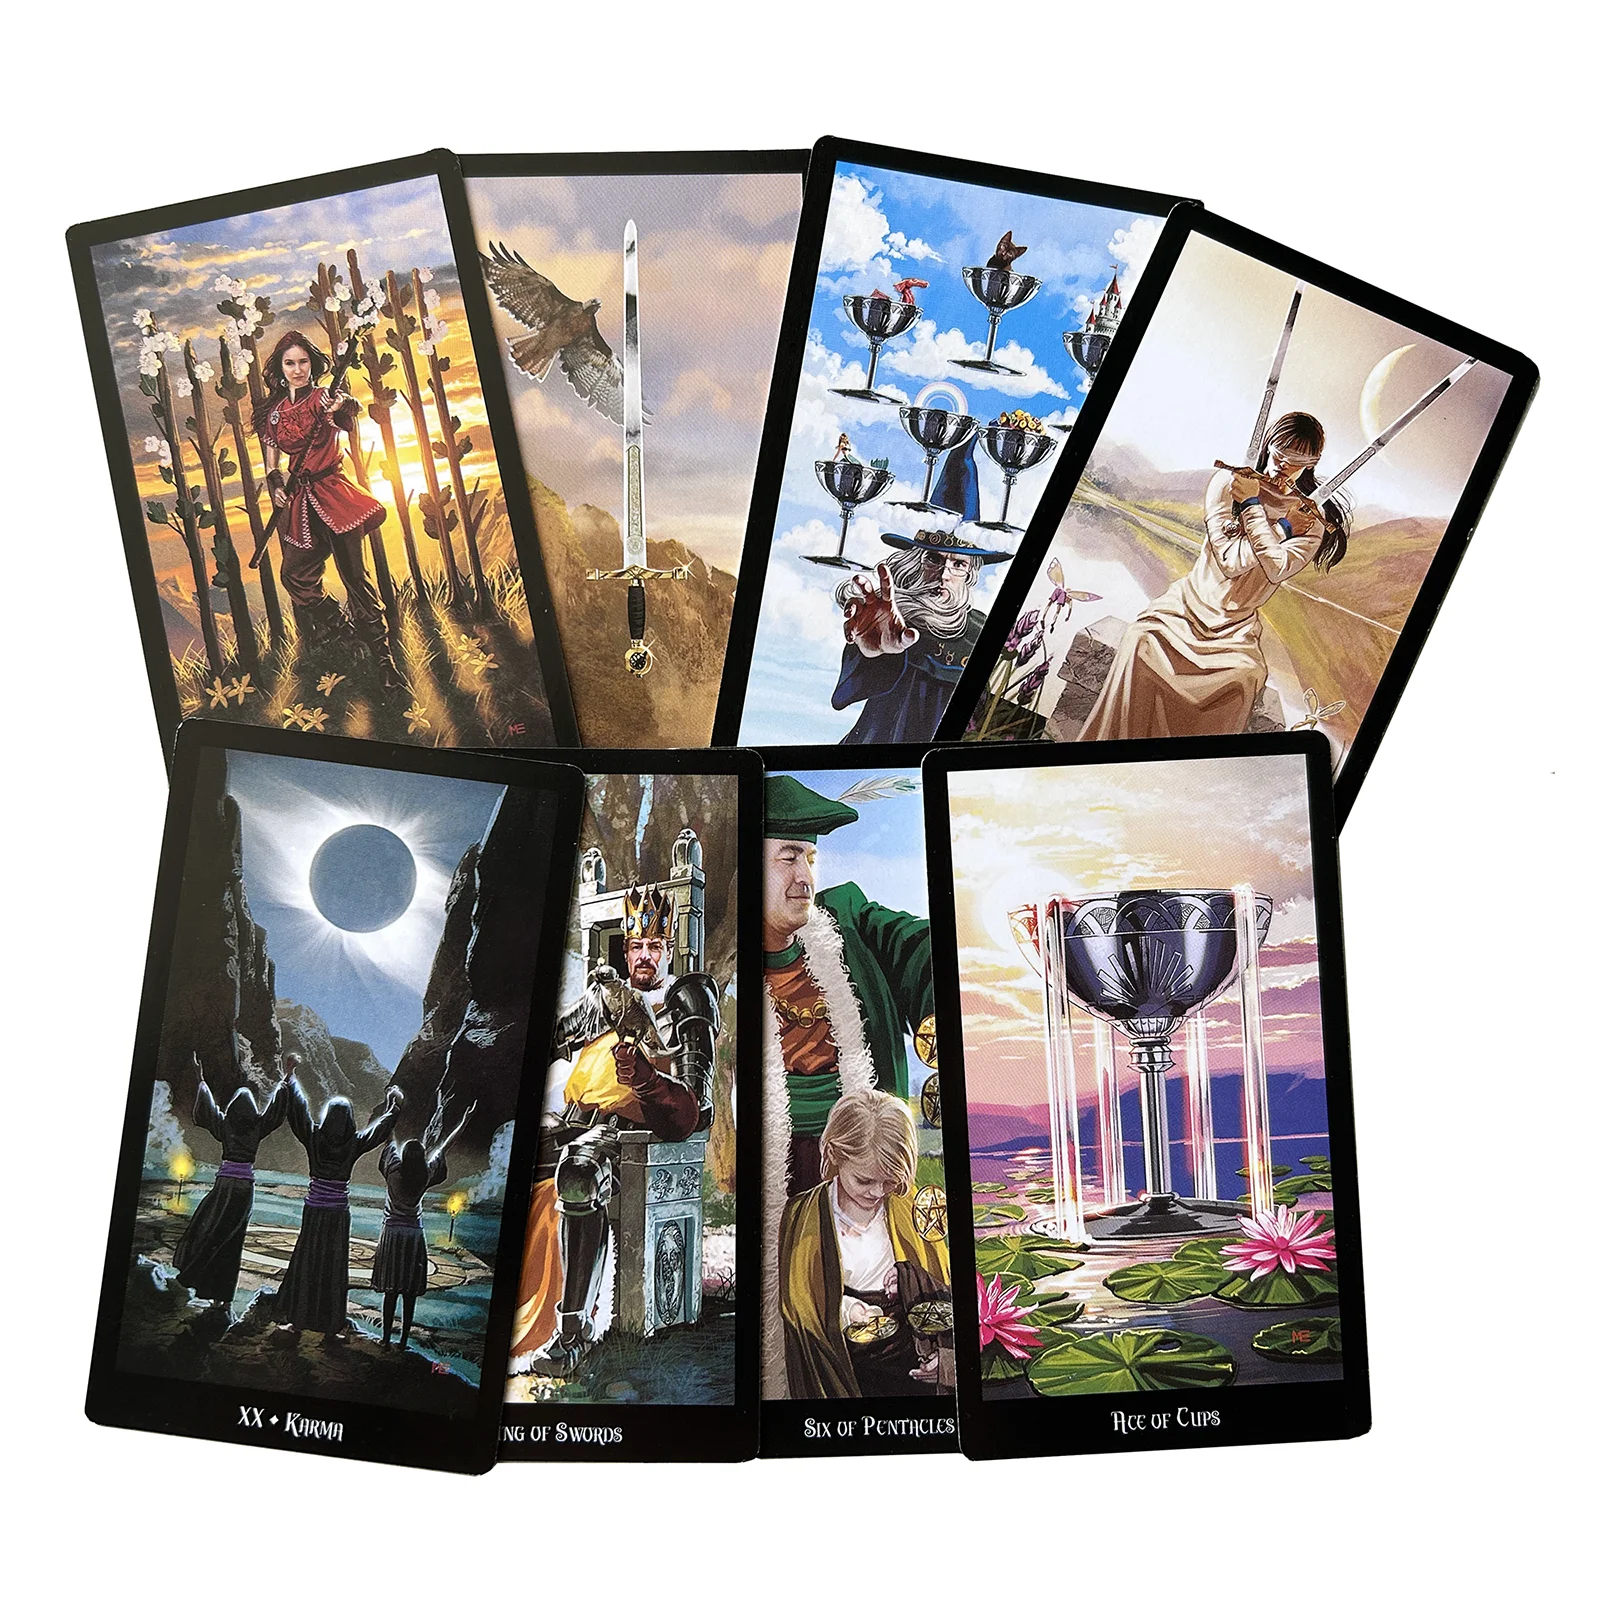 English Deck Tarot 12x7cm High Quality Runes Divination Cards Prophet for Beginners with Guide Book Entertainment Games. reading book for english learners книга для чтения по англо американской литературе